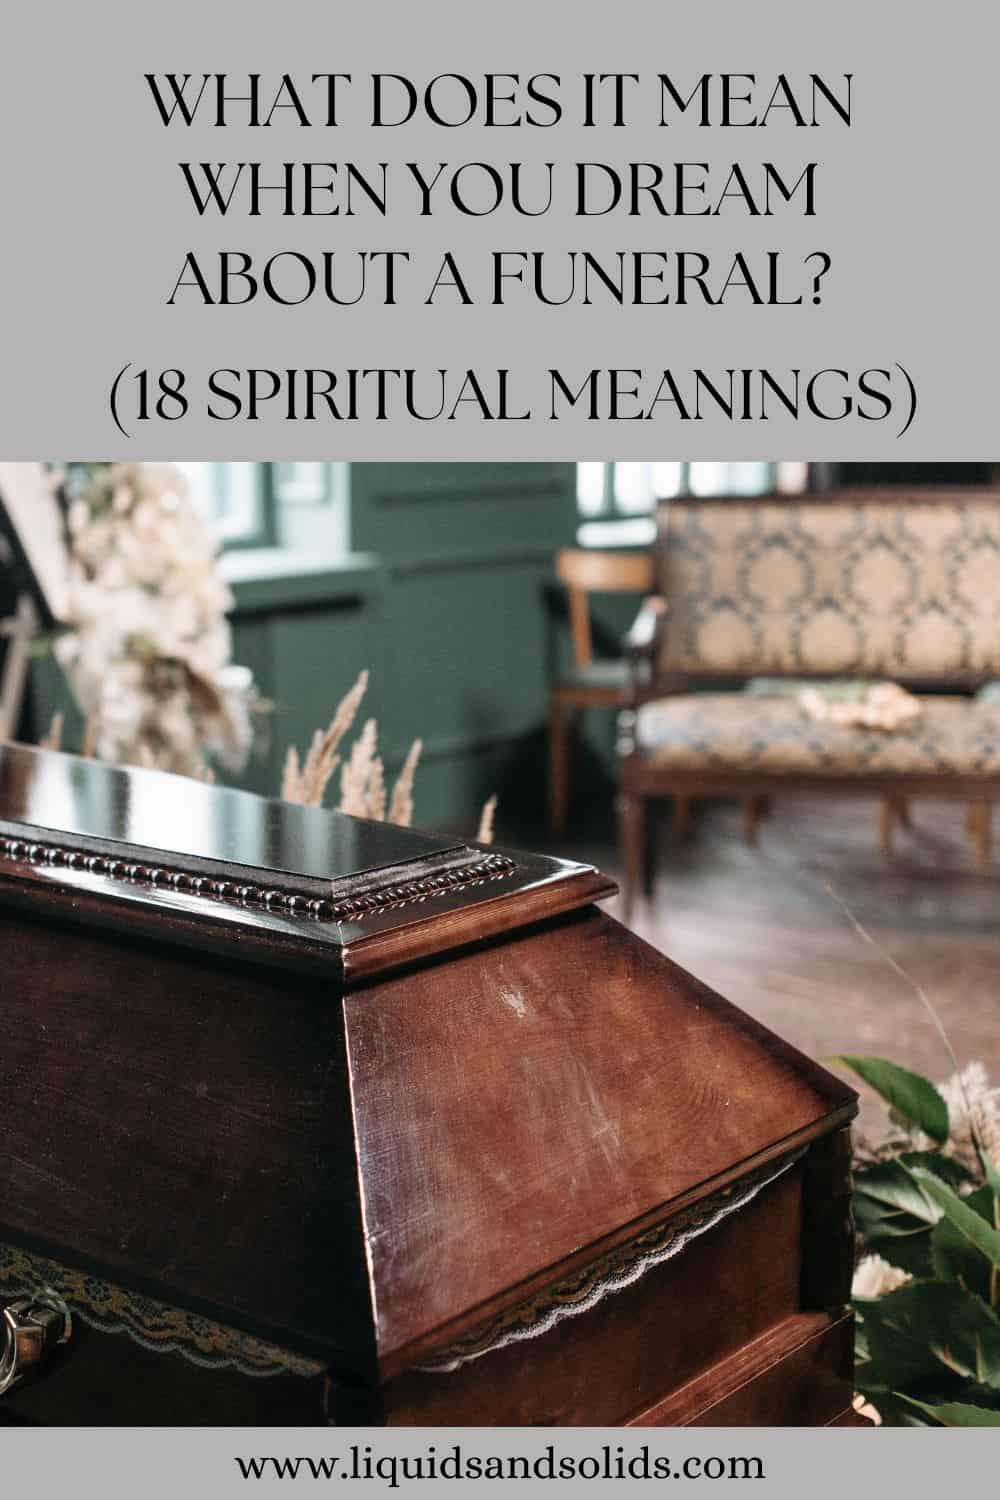 What Does It Mean When You Dream About a Funeral? (18 Spiritual Meanings)